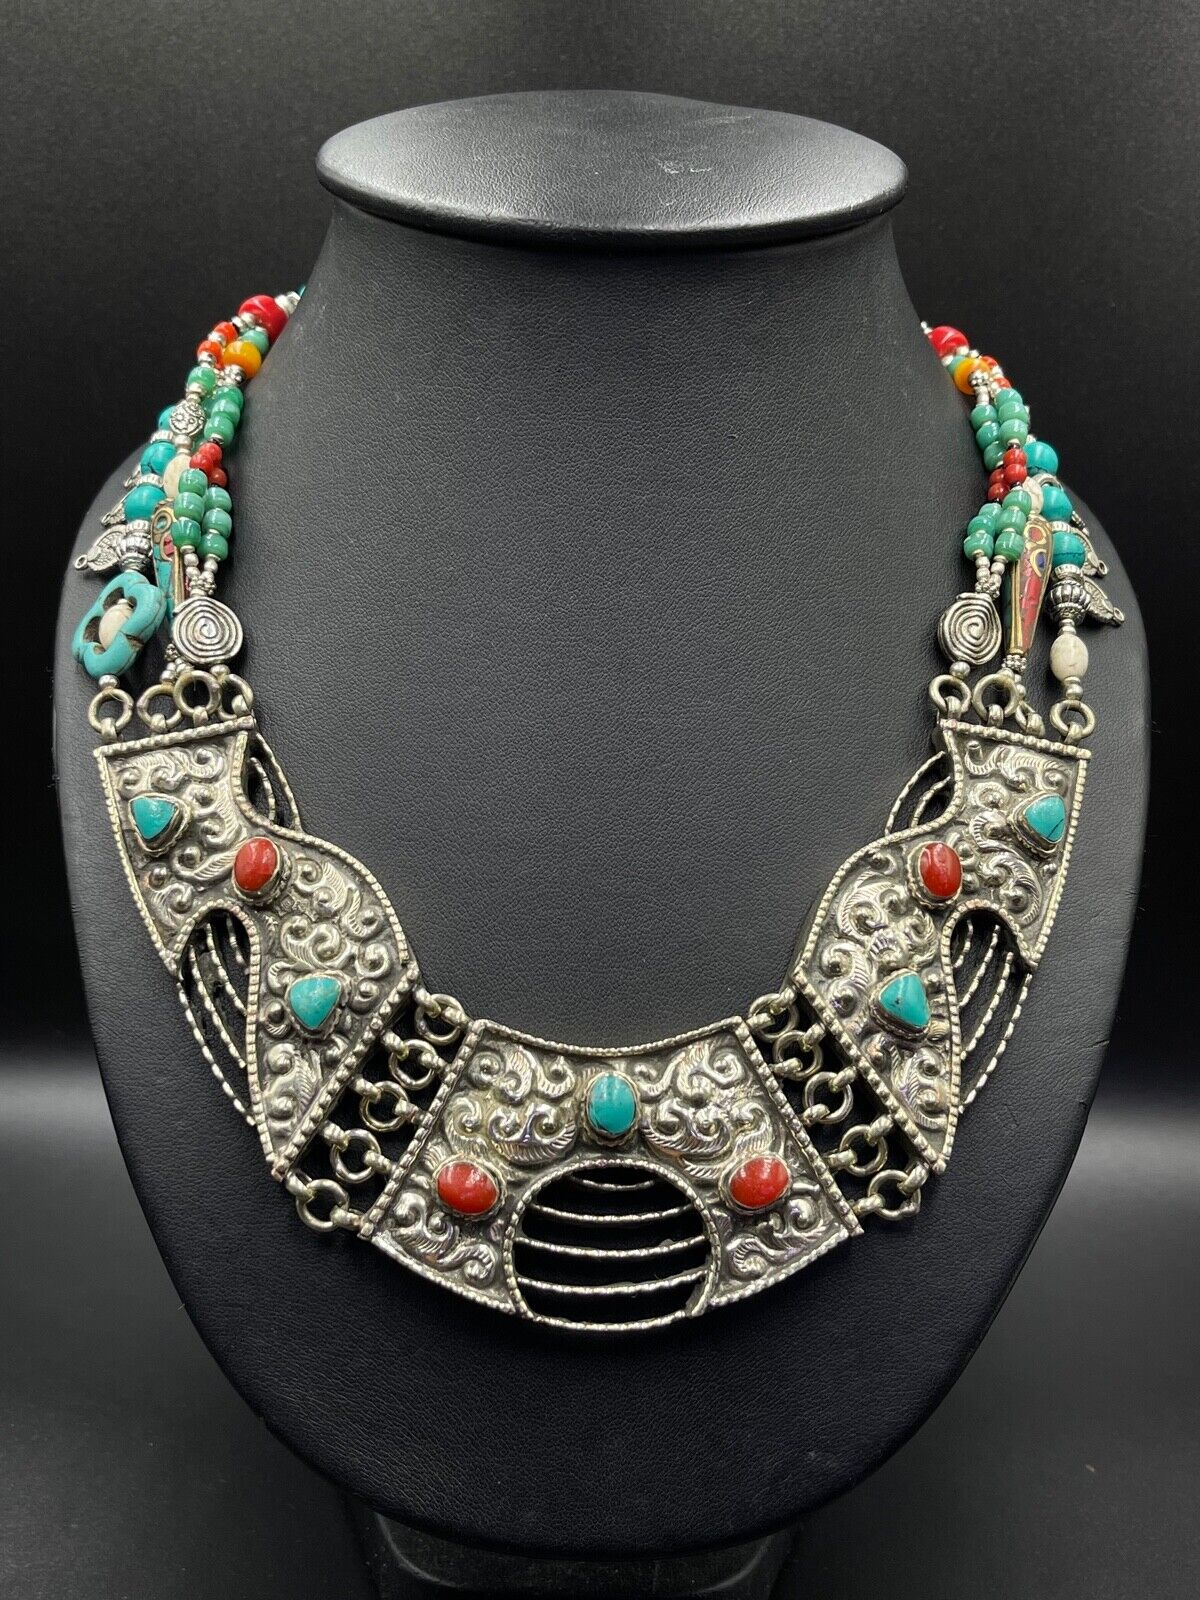 Amazing Handmade Tibetan Old Necklace With Natural Turquoise And Coral Stone